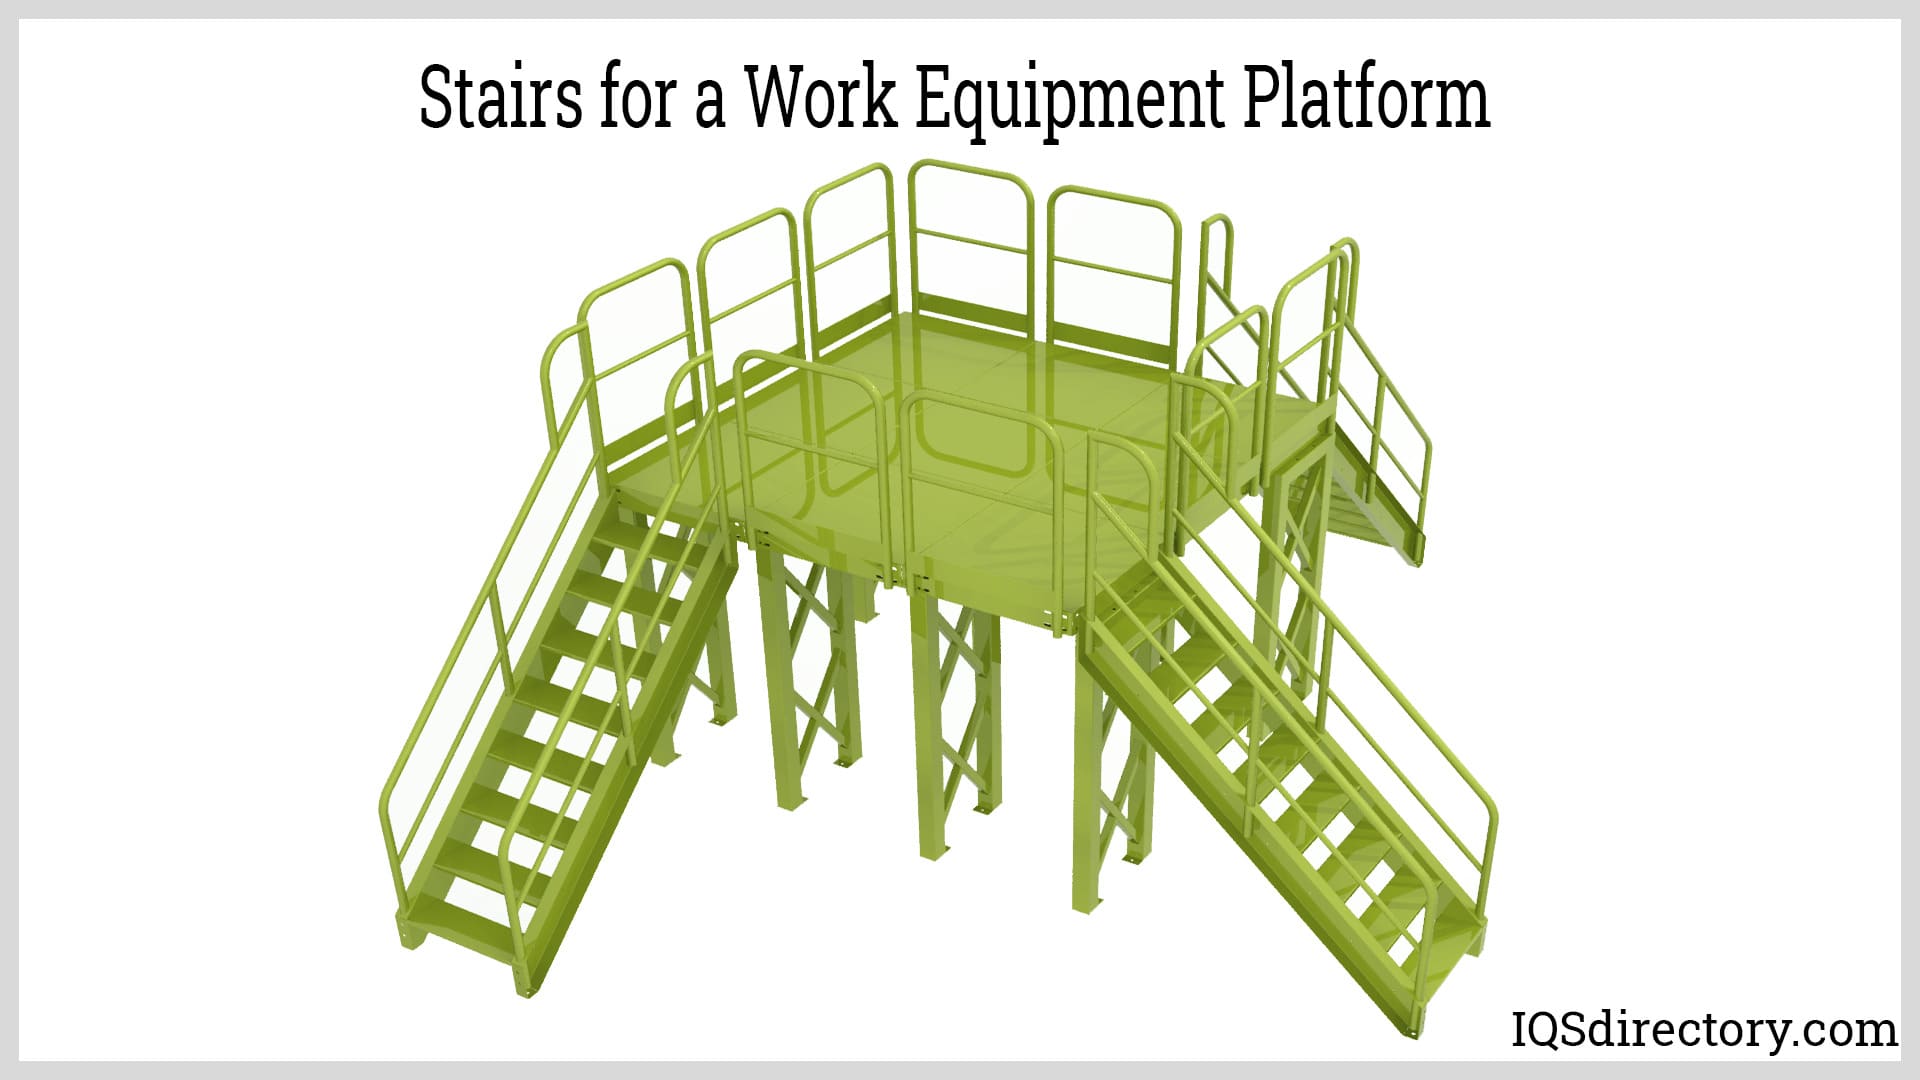 Stairs for a Work Equipment Platform